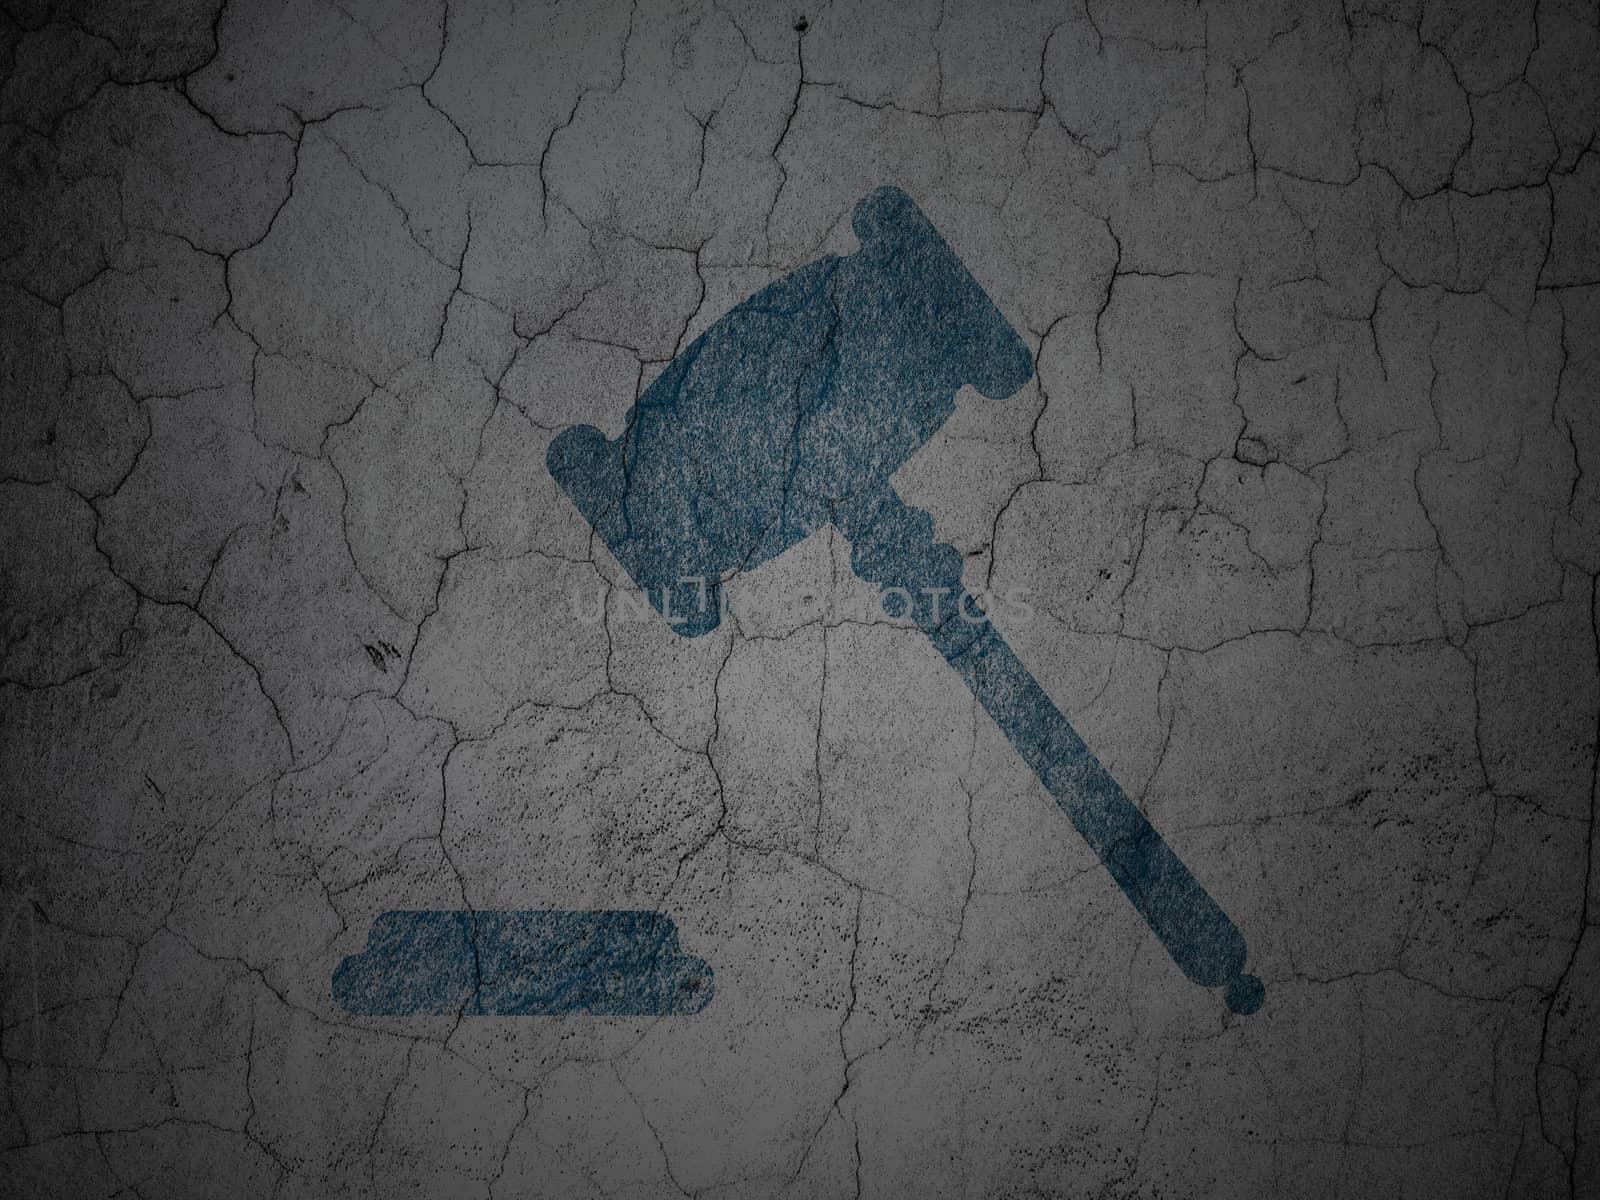 Law concept: Blue Gavel on grunge textured concrete wall background